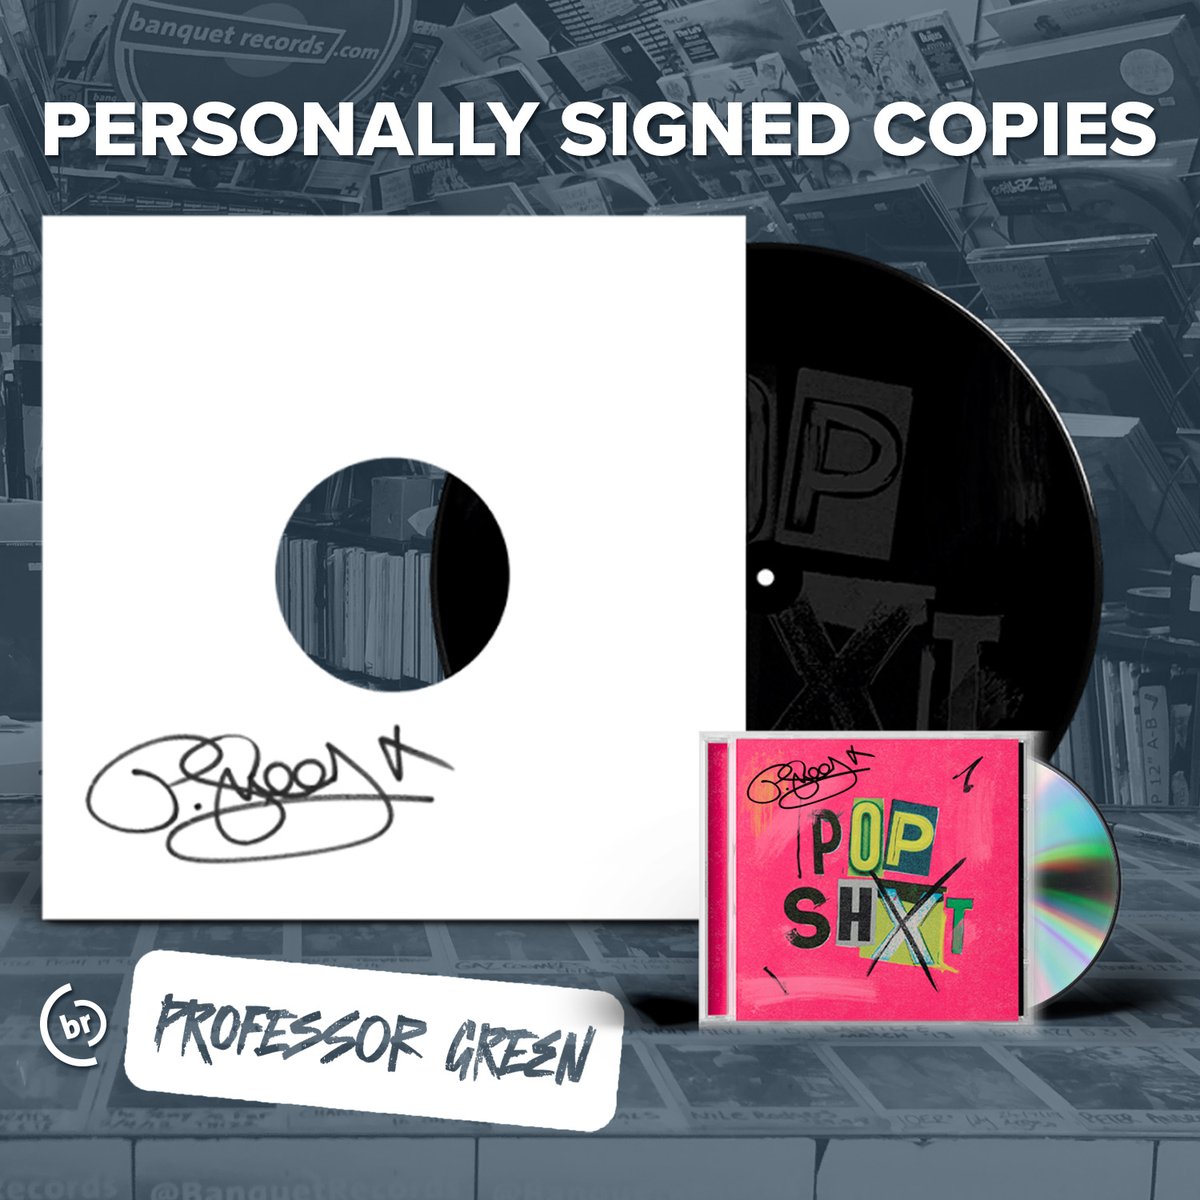 Personally signed vinyl for POP SHXT is now available to pre-order from @BanquetRecords! Limited to only 200 copies🔥🔥 Order yours here: PGreen.lnk.to/popshxt/banque… • Leave the message you’d like written on your LP in the comments section at checkout